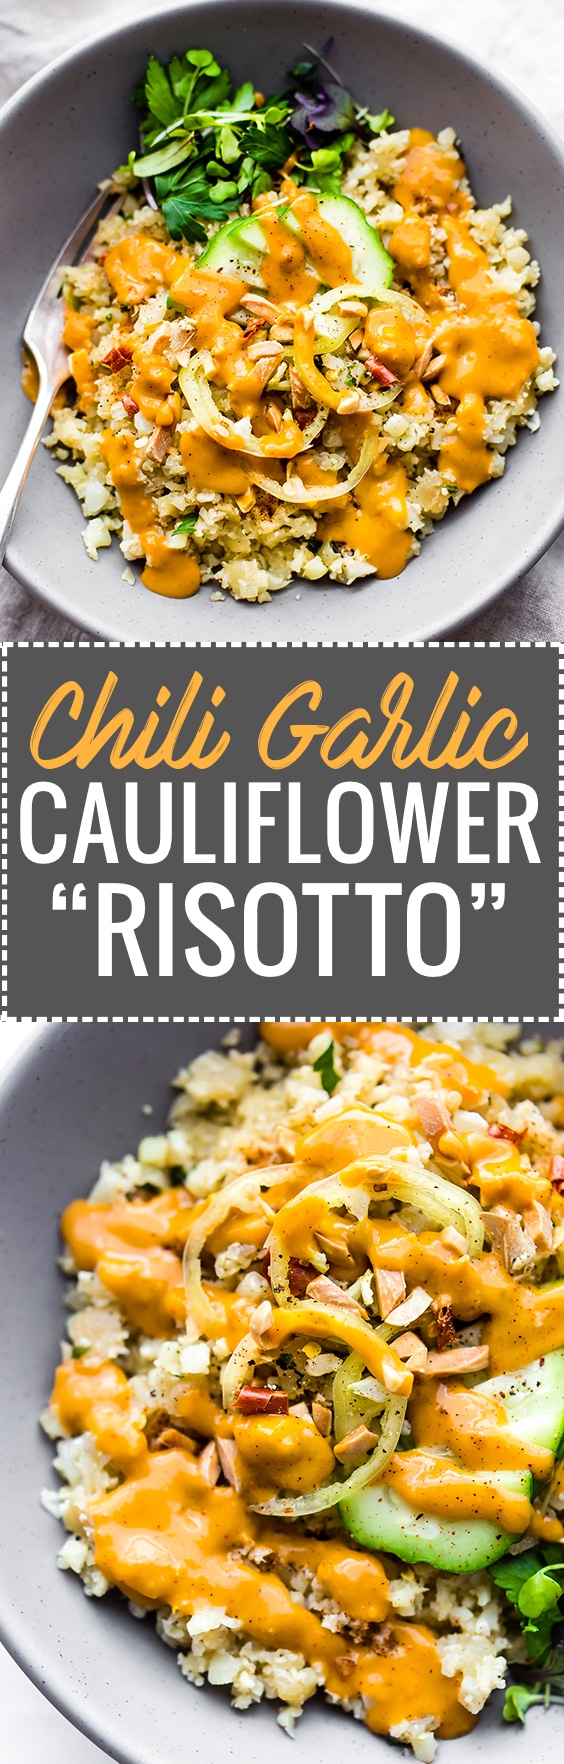 These Chili Garlic Cauliflower "Risotto" Bowls are an easy Paleo dish to satisfy that comfort food craving! A healthy vegan recipe with a spicy sauce. The Cauliflower Rice is the "risotto" and is cooked a non dairy (coconut or almond) milk; all in one pan! The sauce is made extra spicy and creamy with chili, garlic, and avocado combined. Great as side or plant based main. Whole30 options included. www.cottercrunch.com @cottercrunch